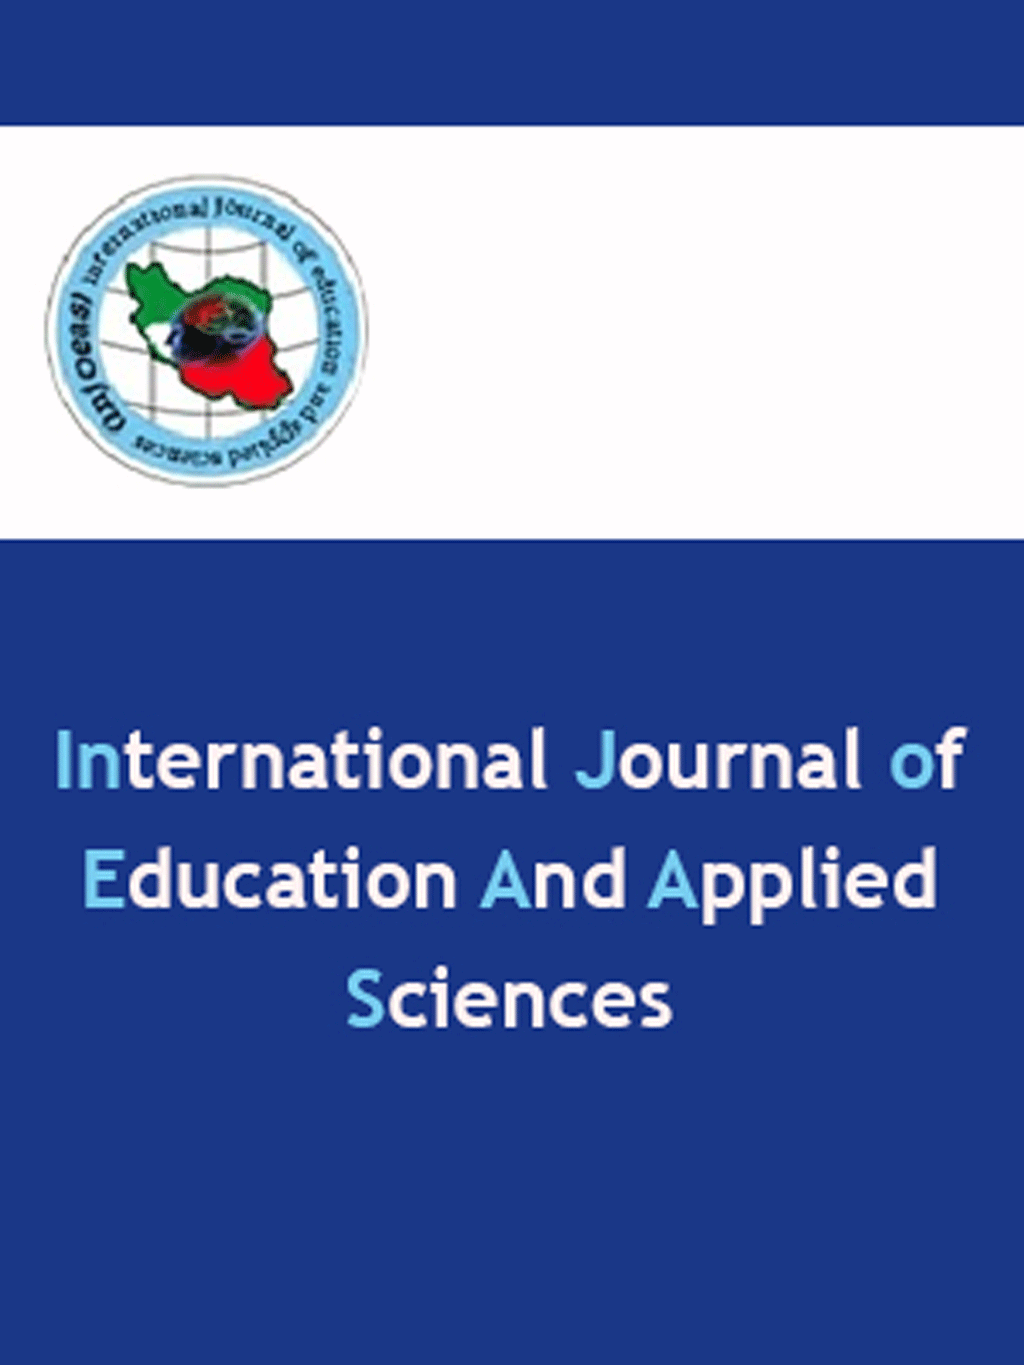 Education and Applied Sciences - July 2022, Volume 3 - Number 2